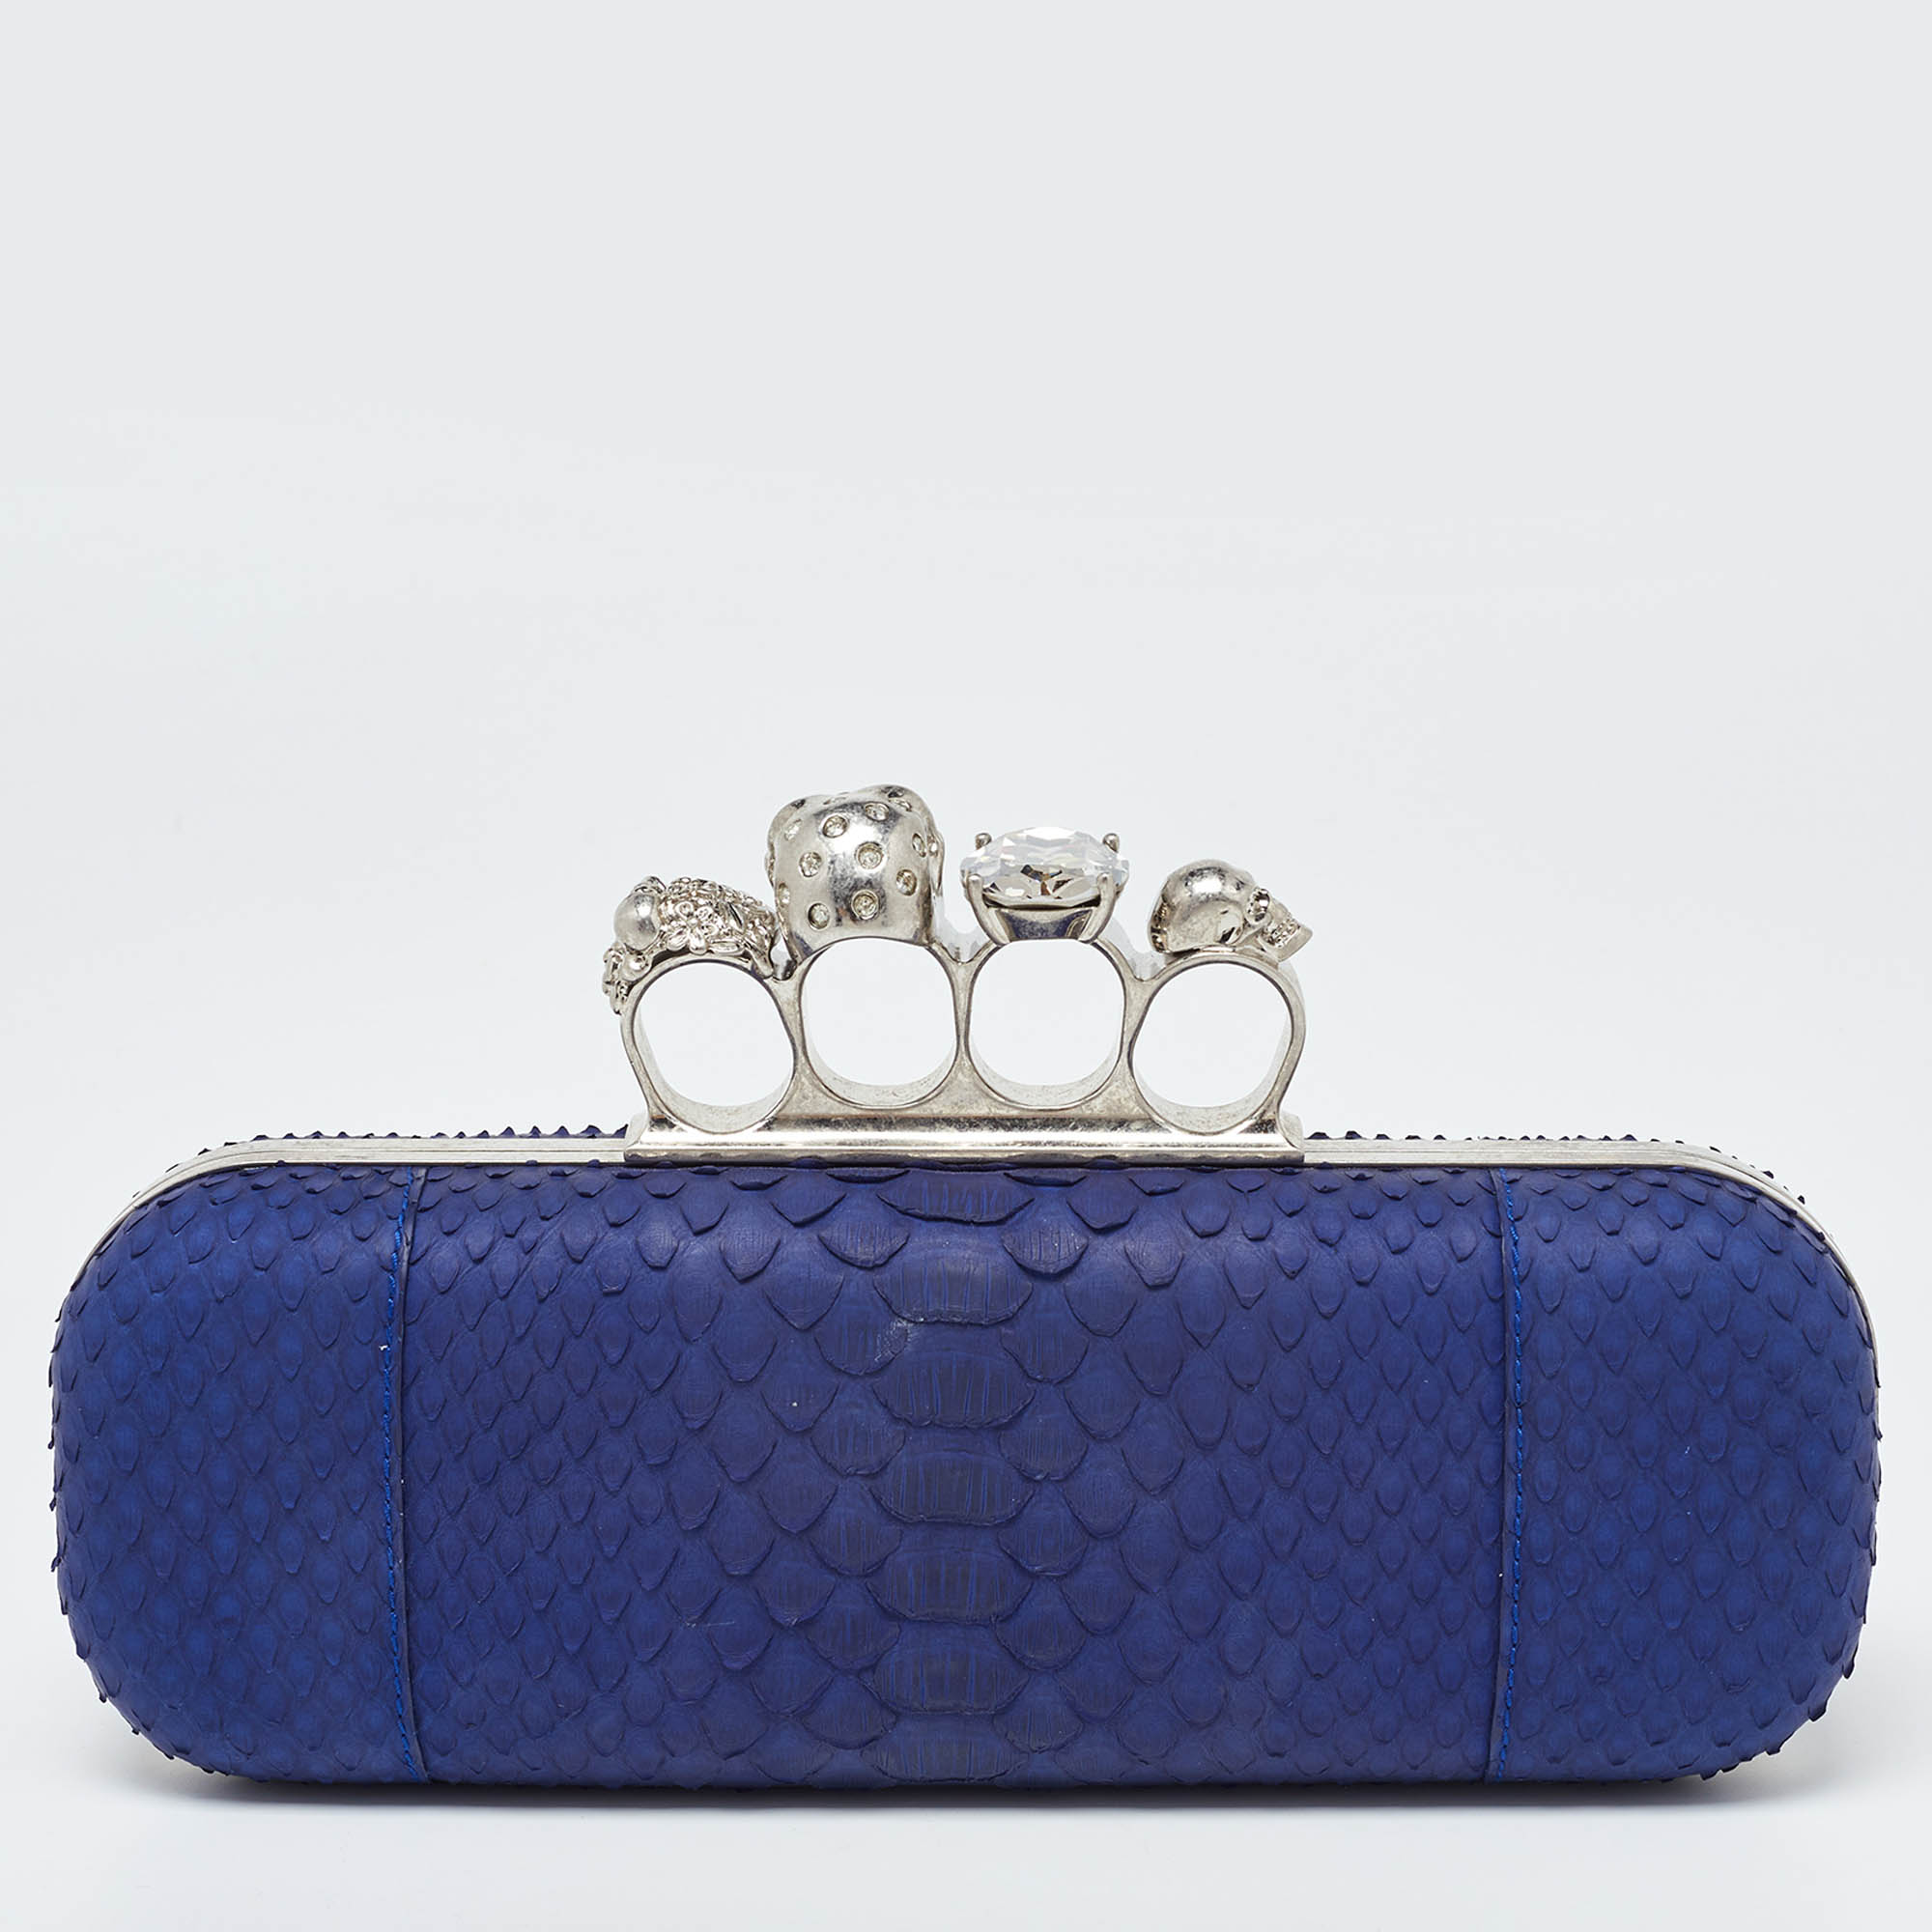 Pre-owned Alexander Mcqueen Blue Python Skull Knuckle Box Clutch